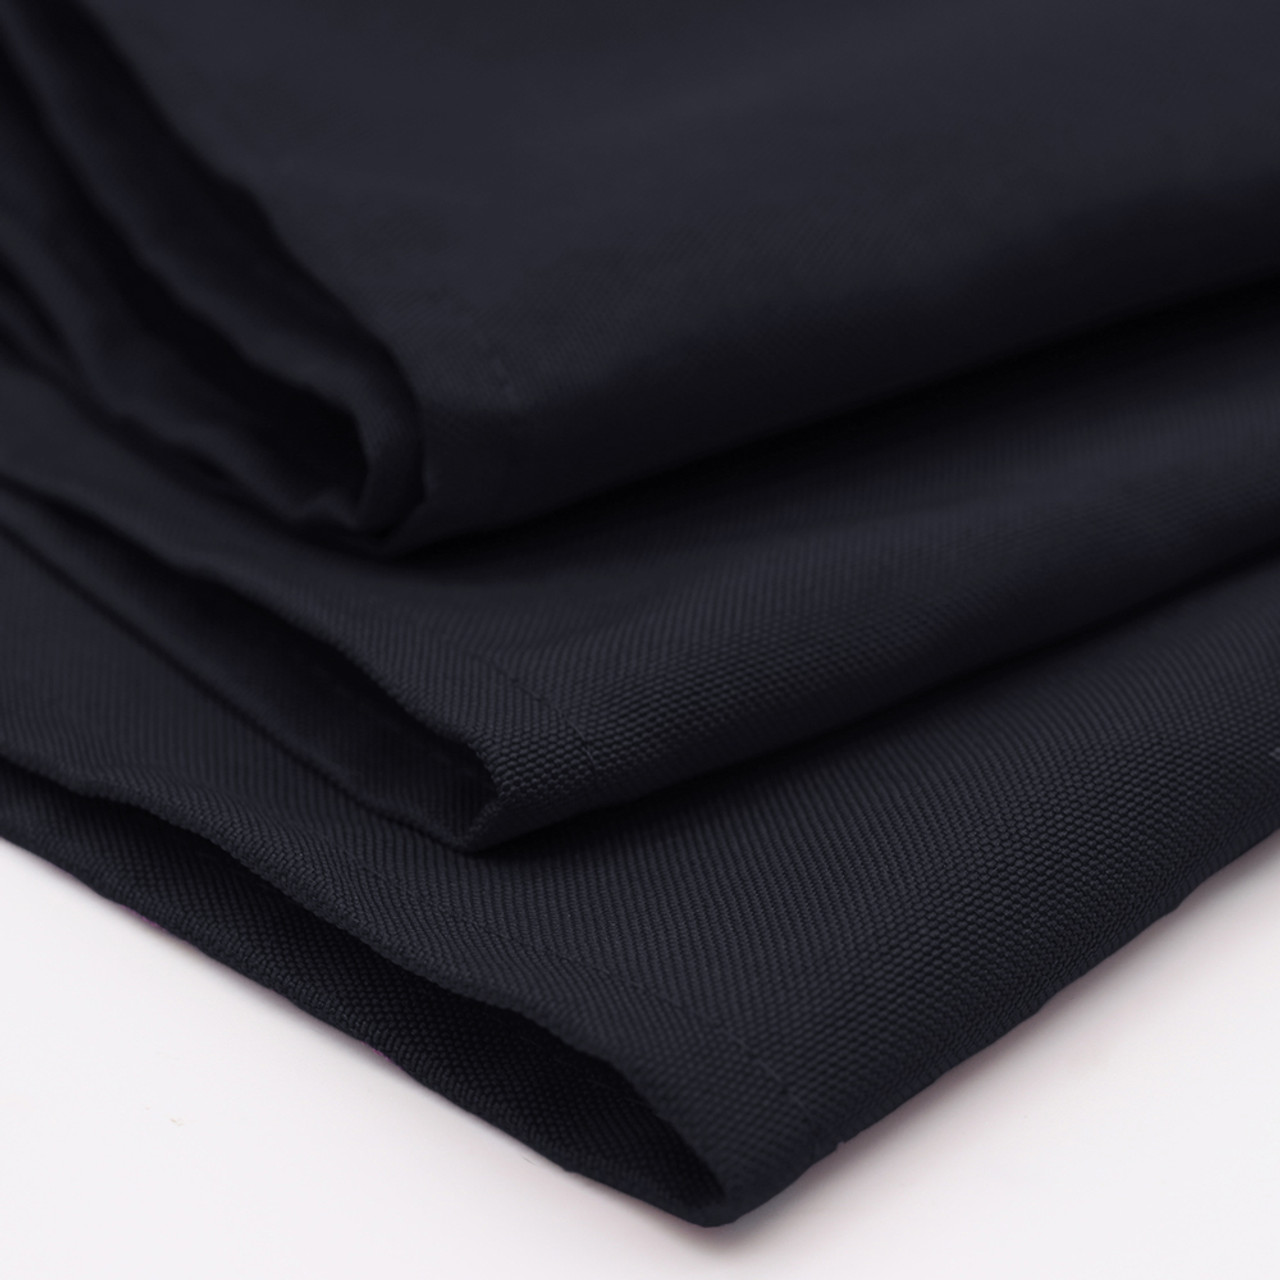 90 x 90 Inch Square Polyester Tablecloth Black - Your Chair Covers Inc.